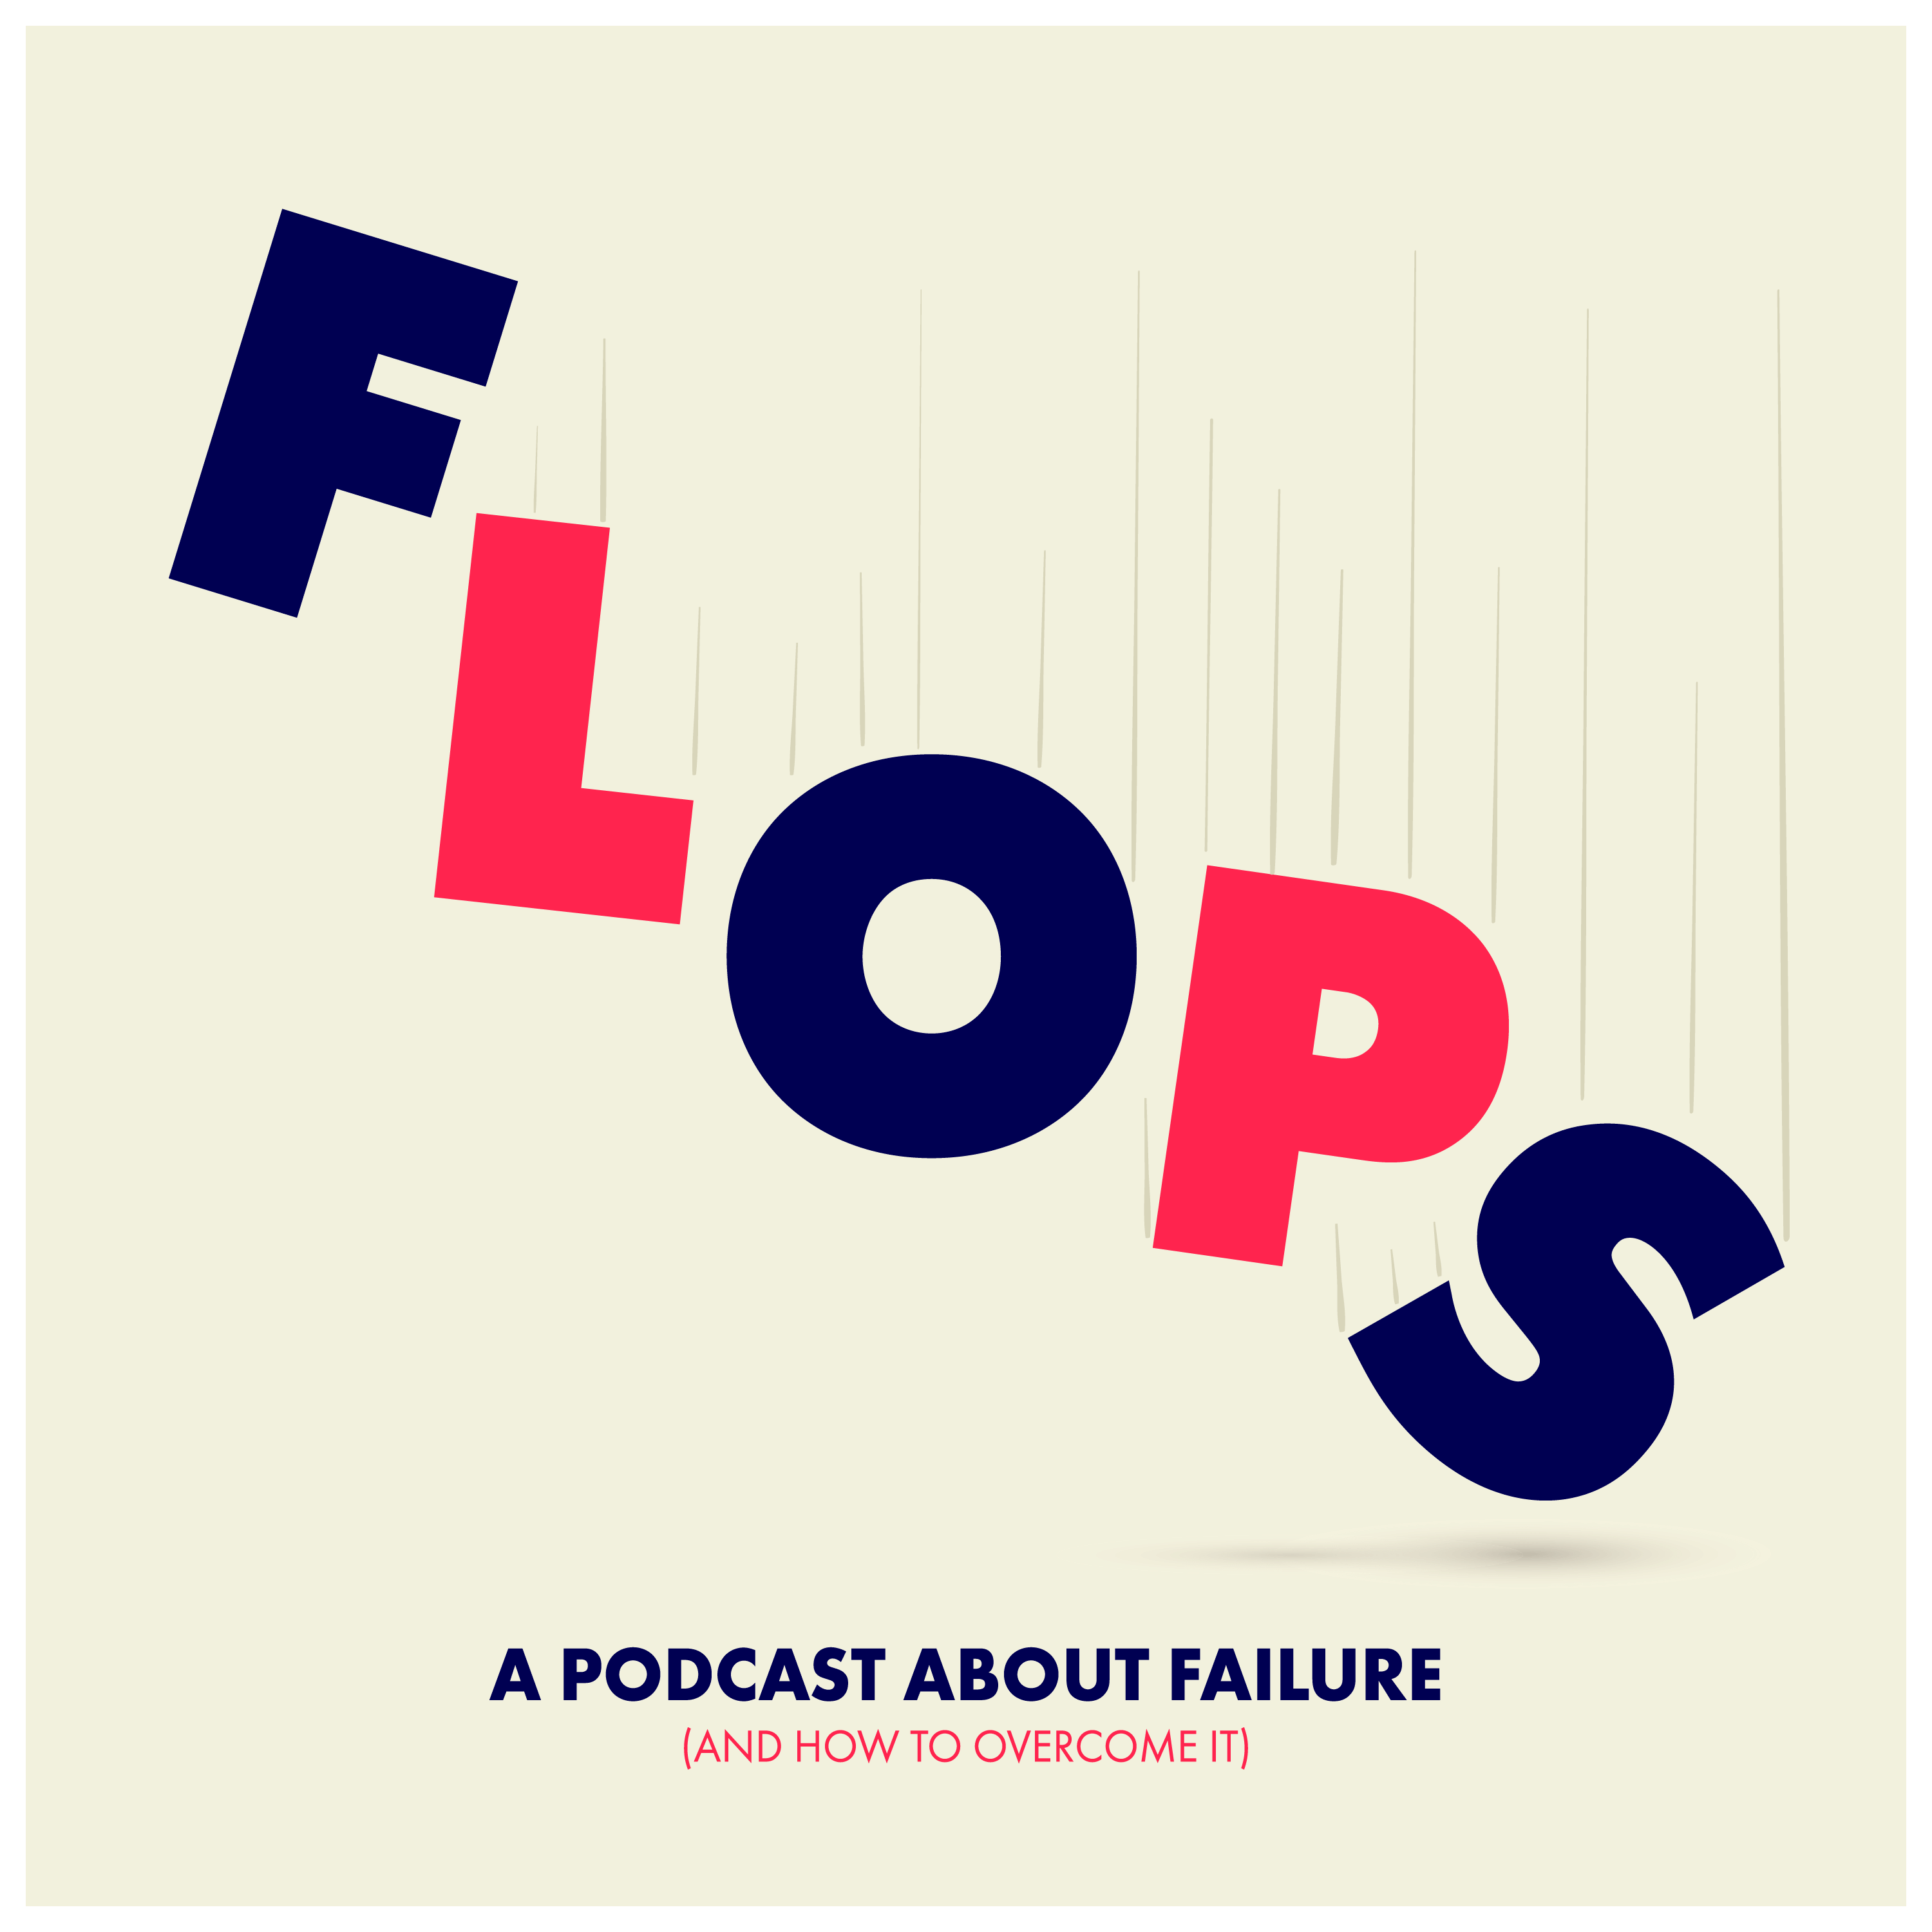 Flops Podcast Cover with letter F L O P S falling